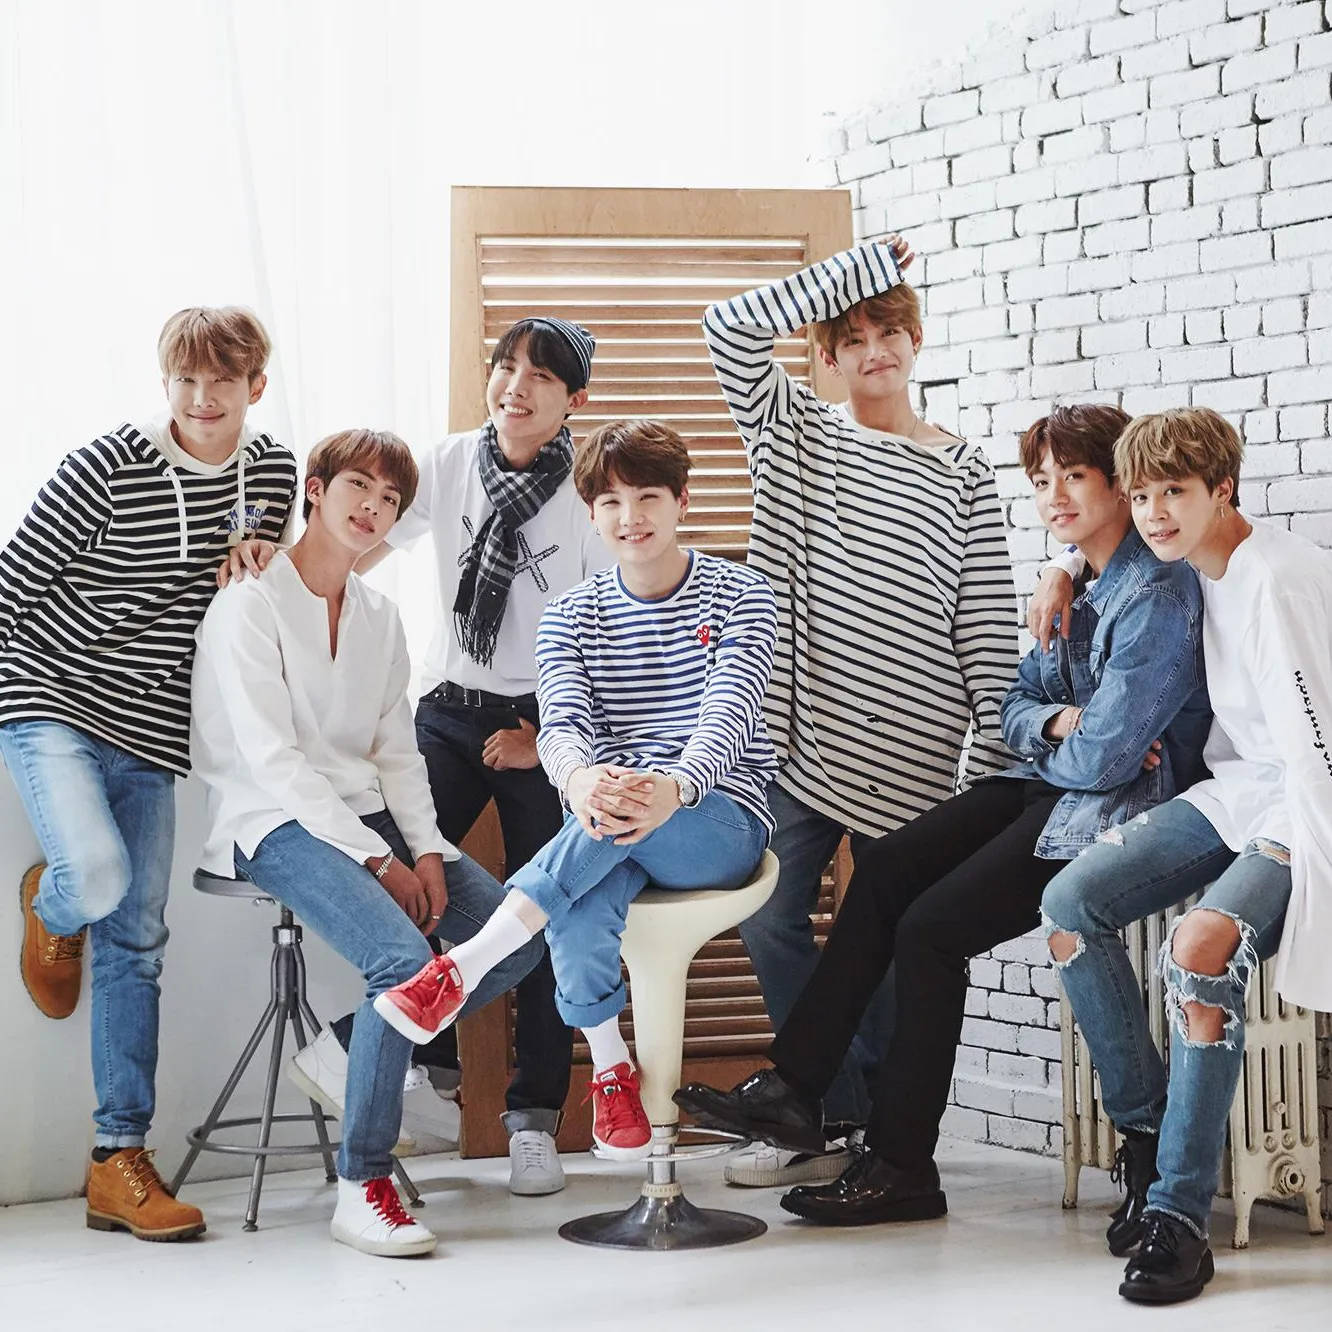 Cute Bts Group Posing Together By The Cabin Wallpaper